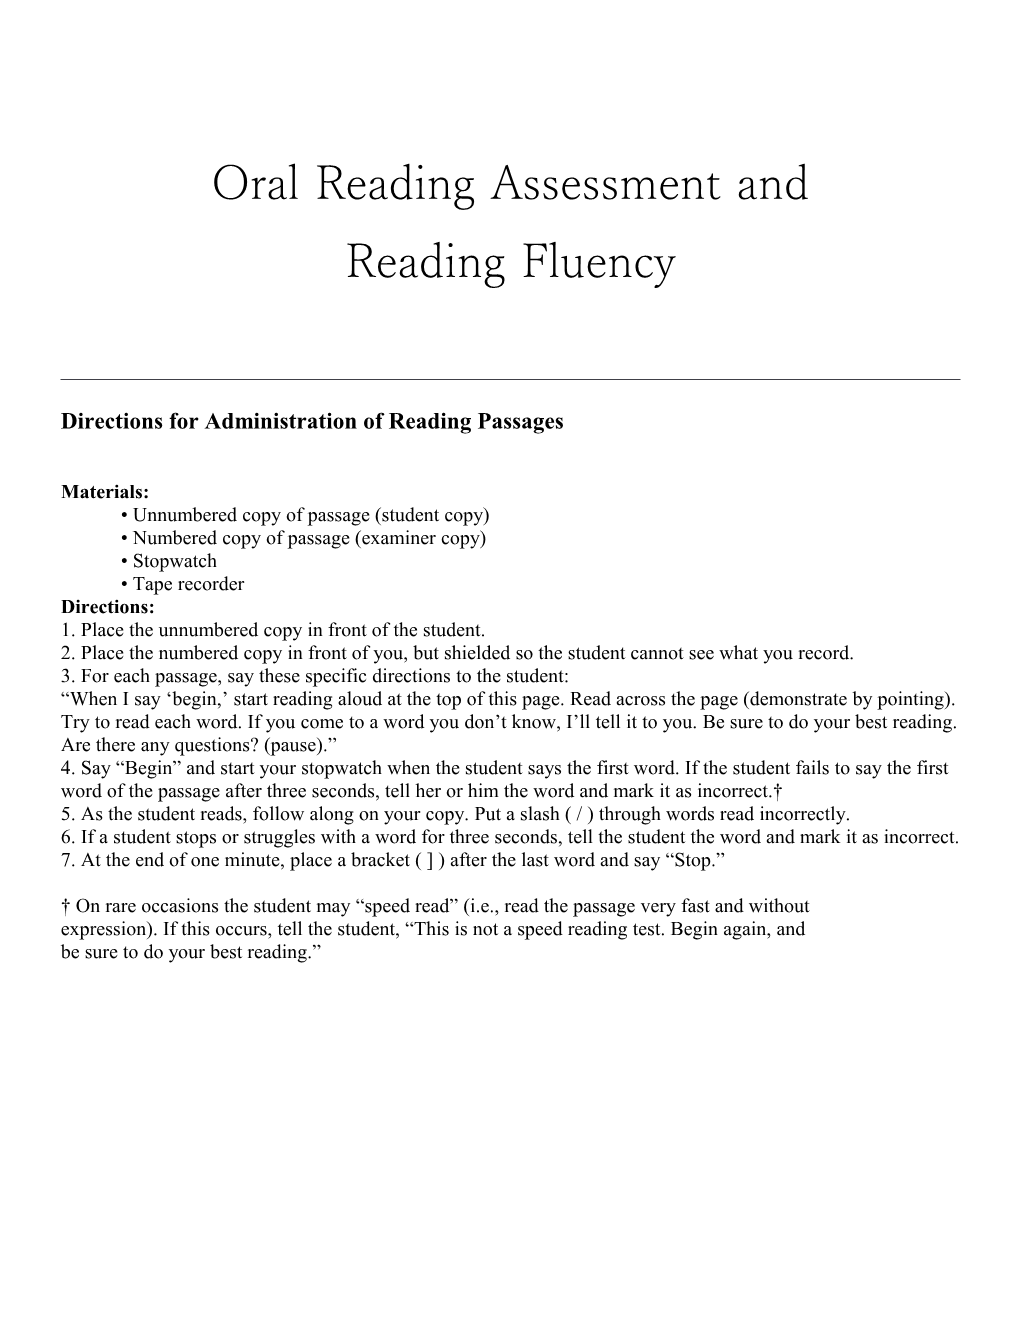 Directions for Administrationof Reading Passages